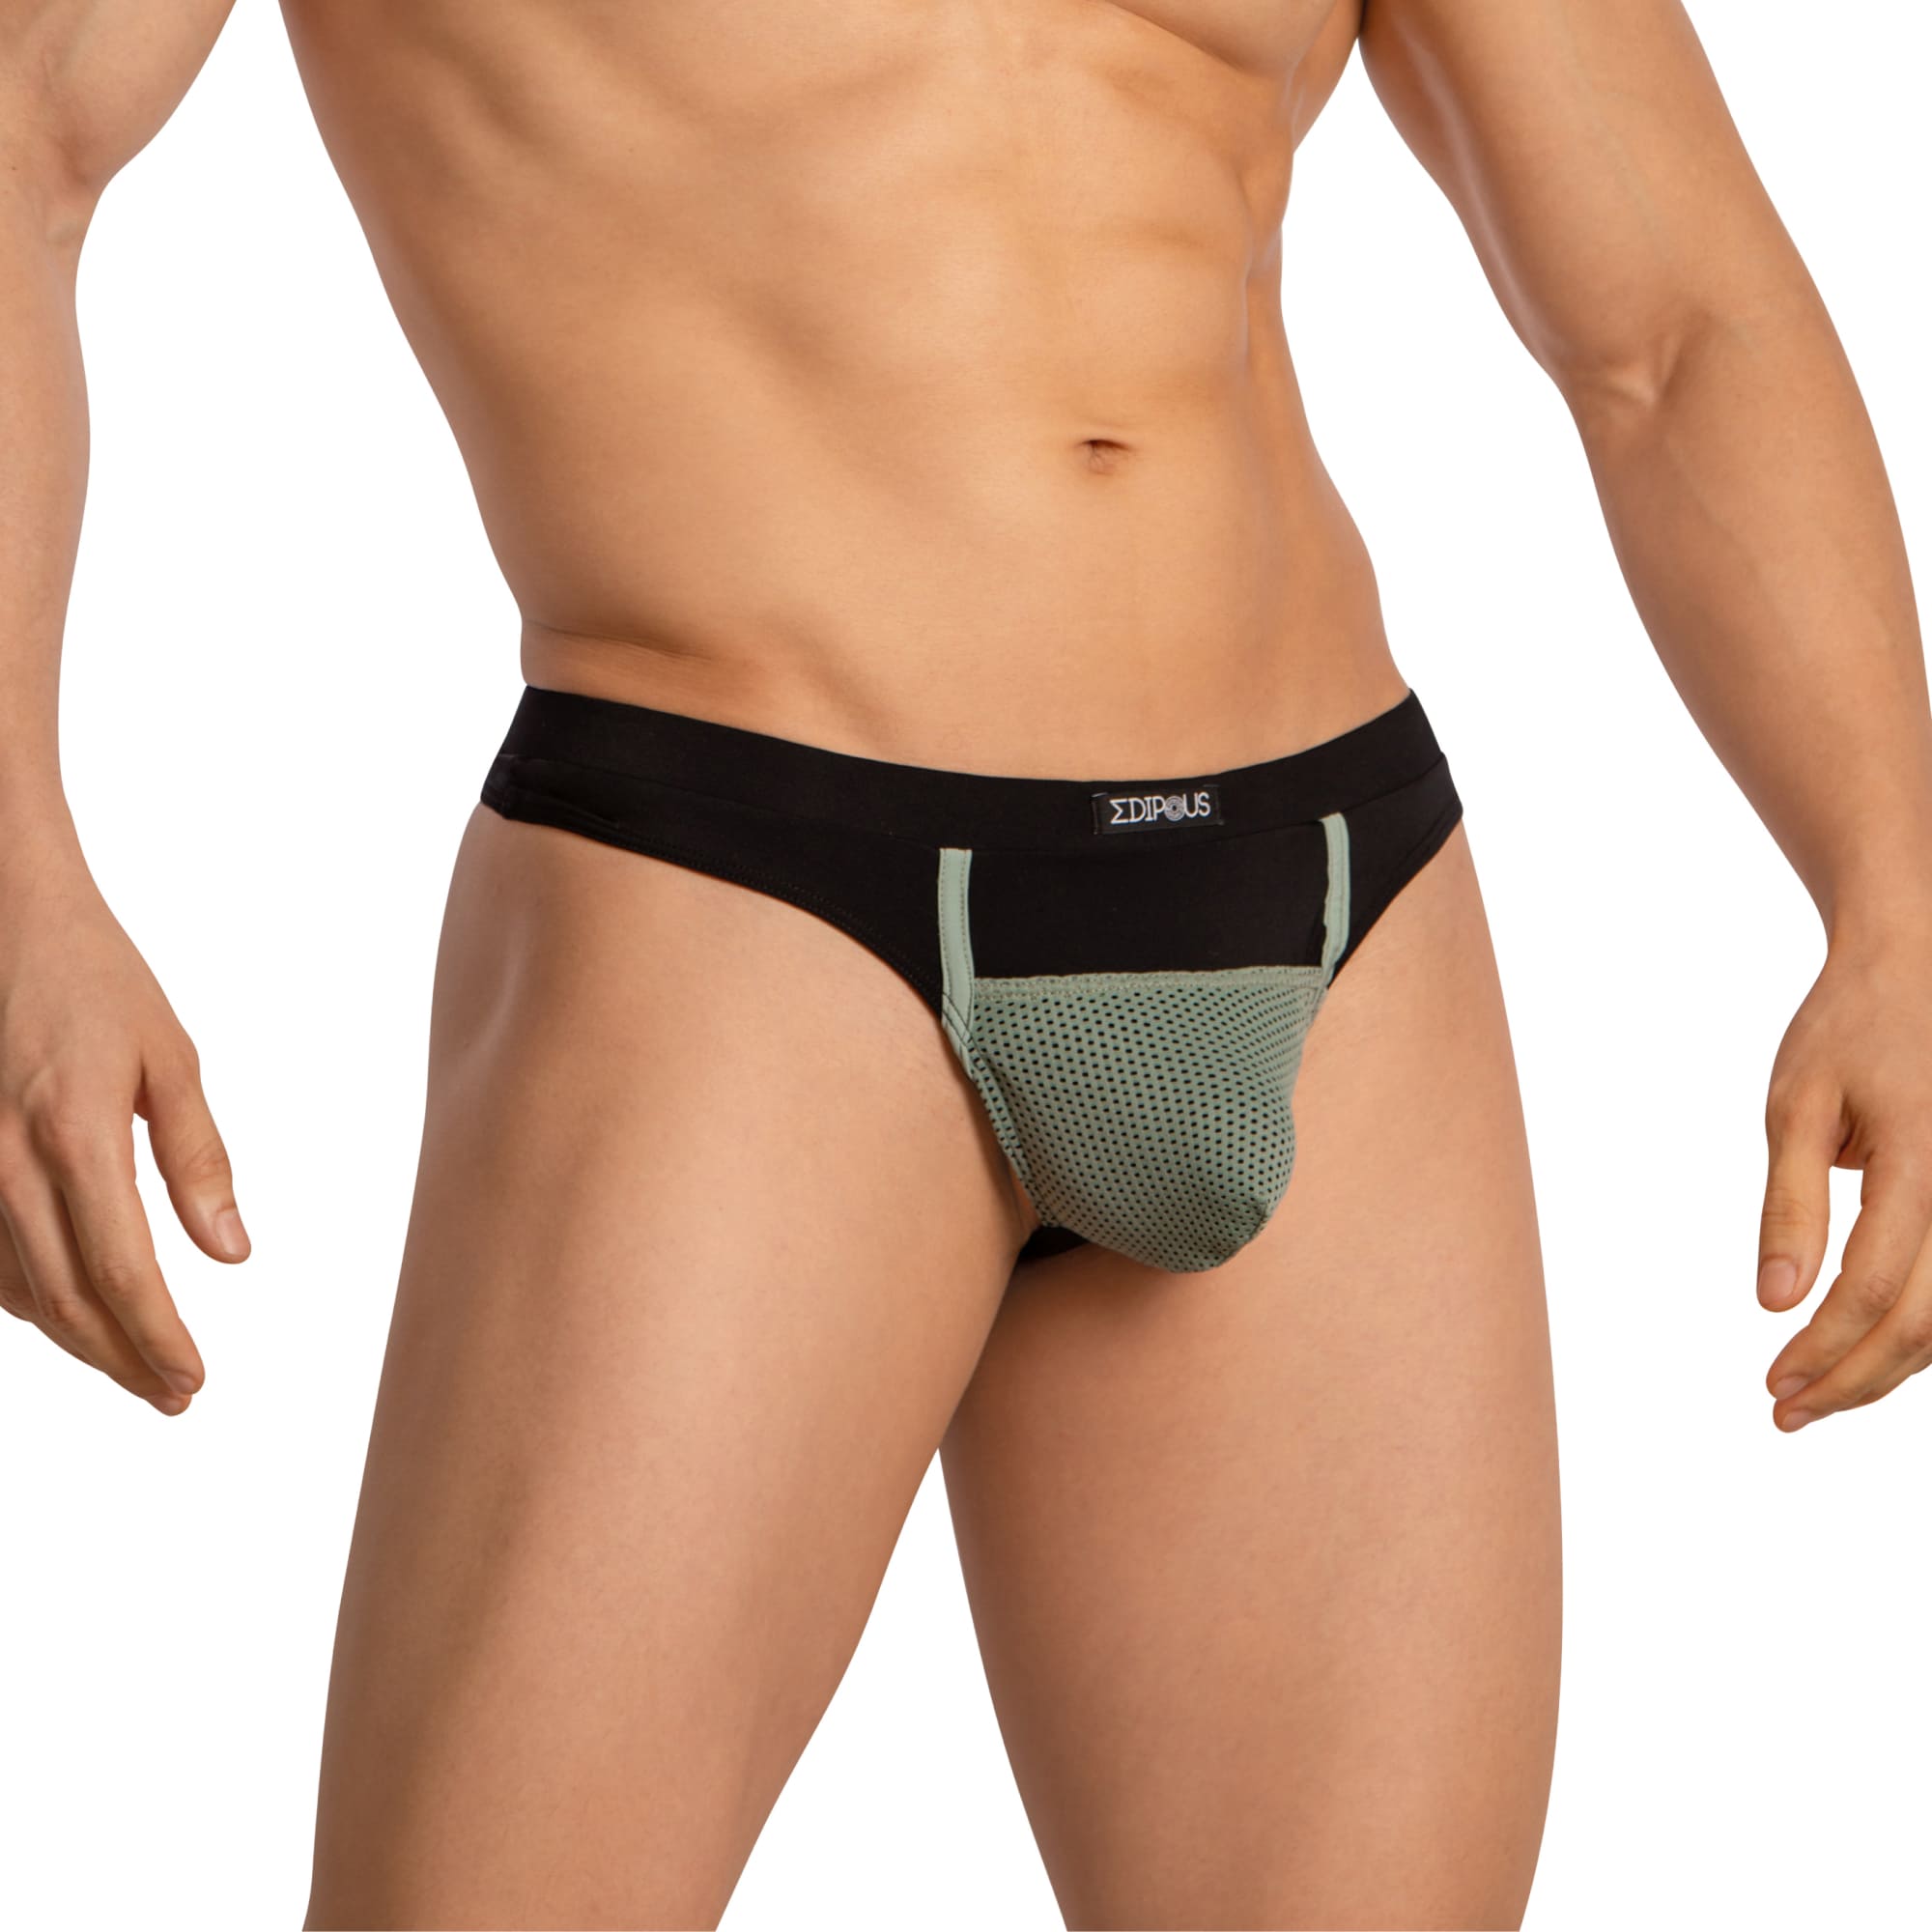 Edipous Sexy and Classic Mesh Men's Thong EDK024